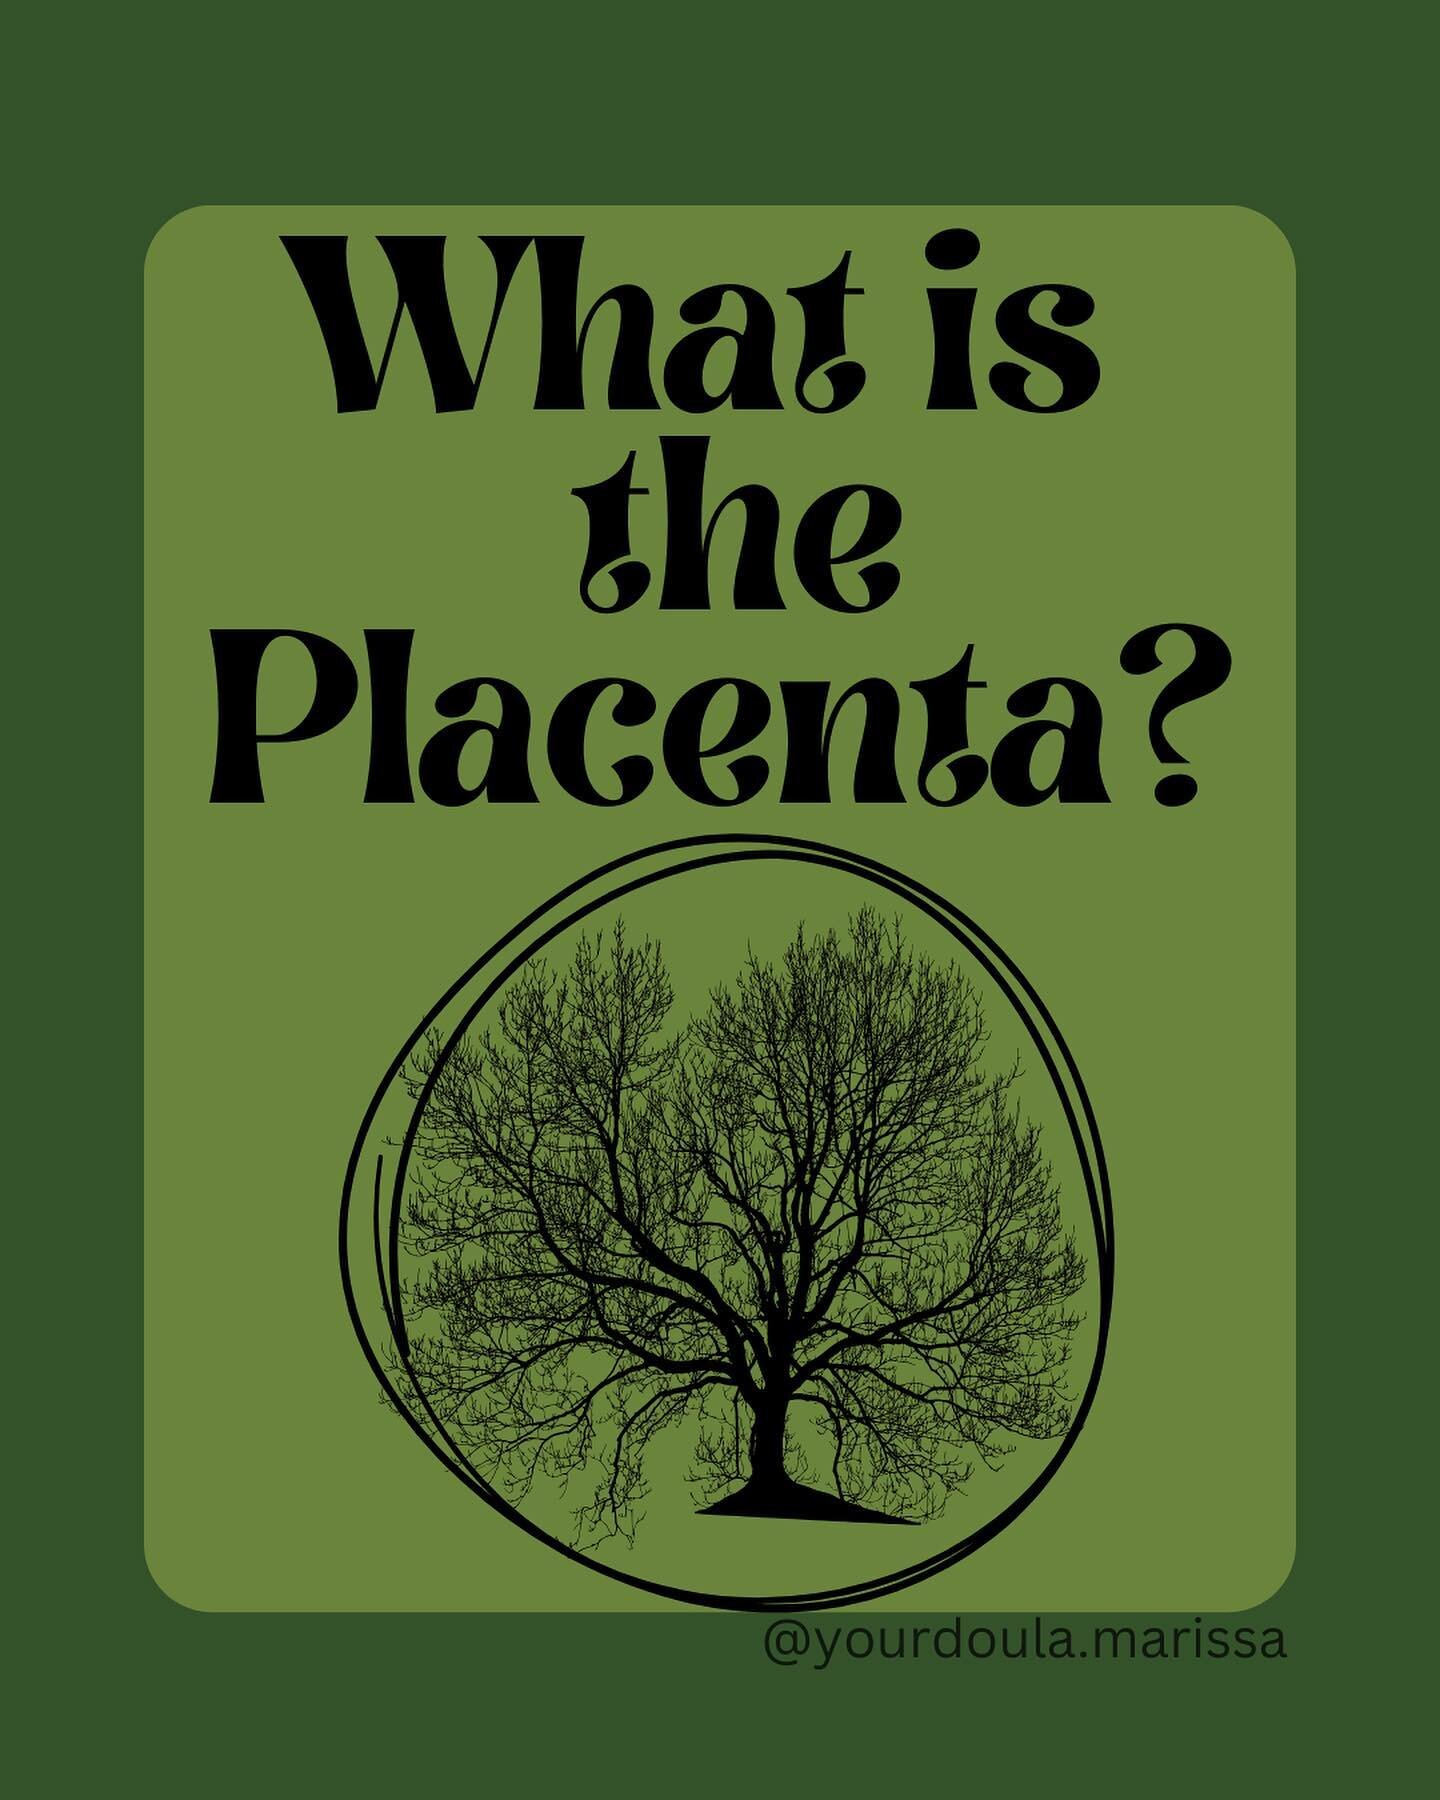 What is the placenta? Only the coolest organ ever!! 
It&rsquo;s the only organ that the body develops completely from scratch and then expels of after it&rsquo;s done it job. 

✨It&rsquo;s more than just &ldquo;medical waste&rdquo;. 
✨It supported li